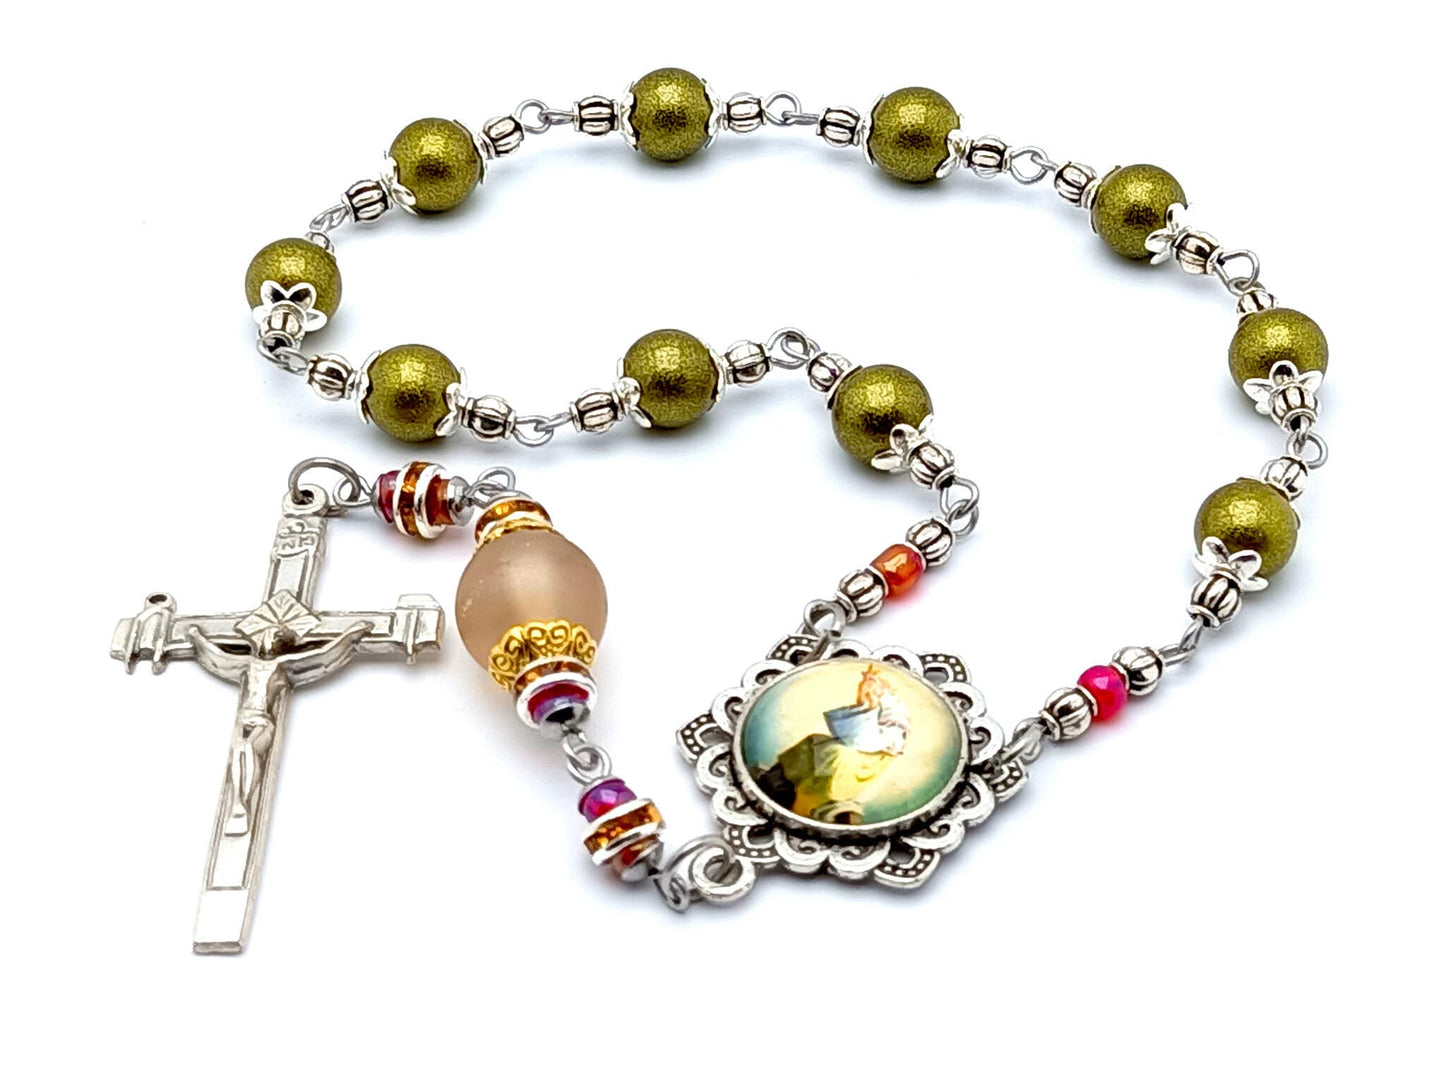 Our Lady of La Salette unique rosary beads single decade rosary with green and peach glass beads, silver La Salette crucifix and picture centre medal.